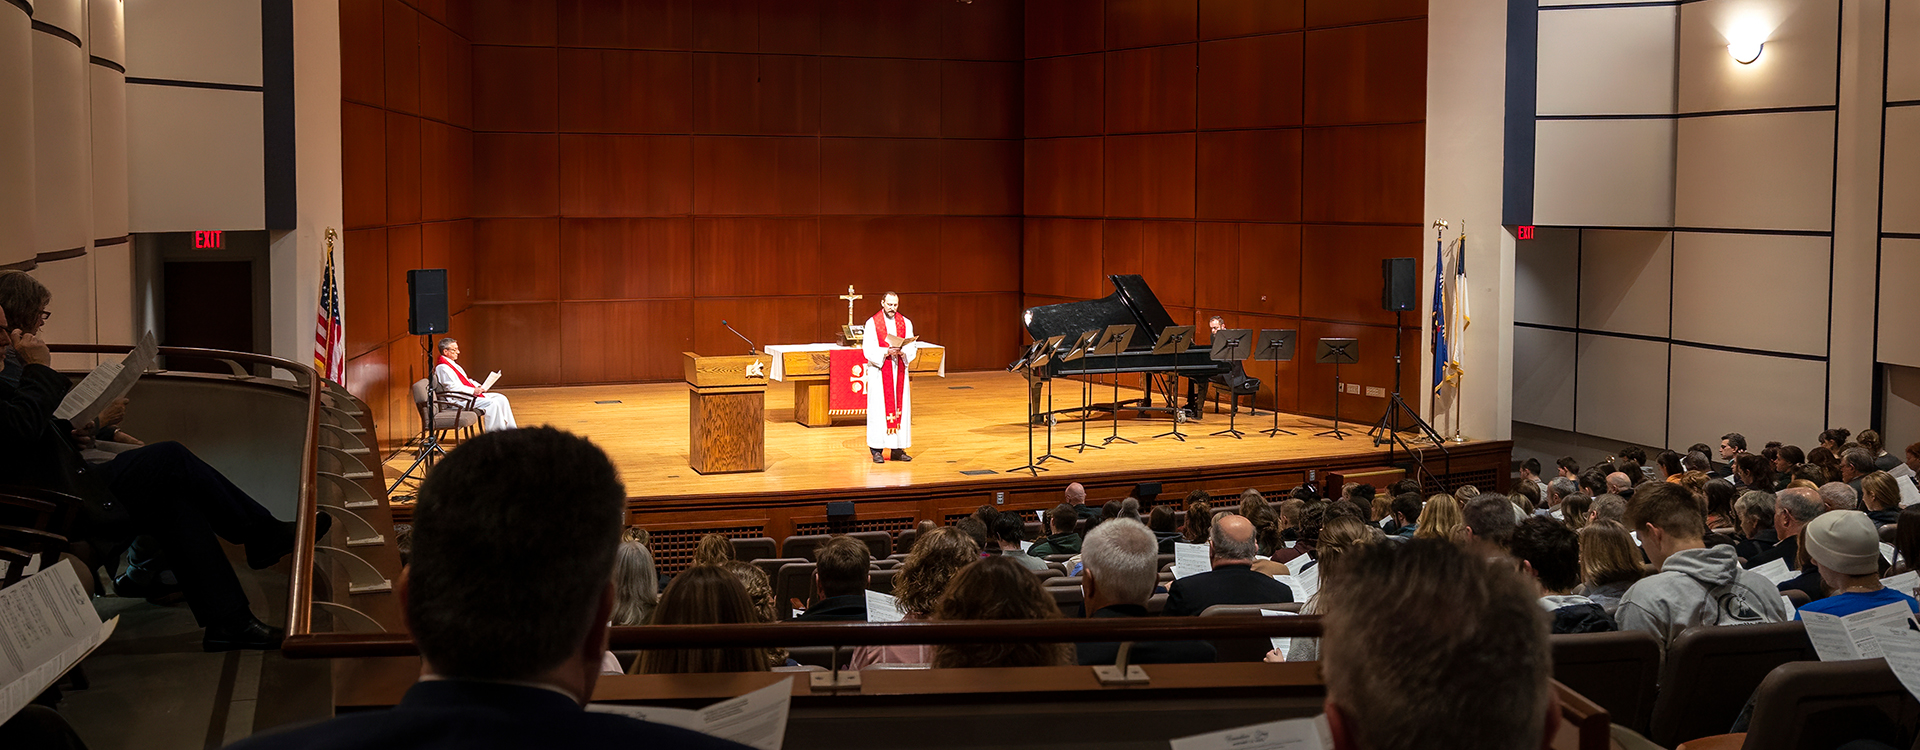 50th anniversary chapel service overview in Schwan Concert Hall